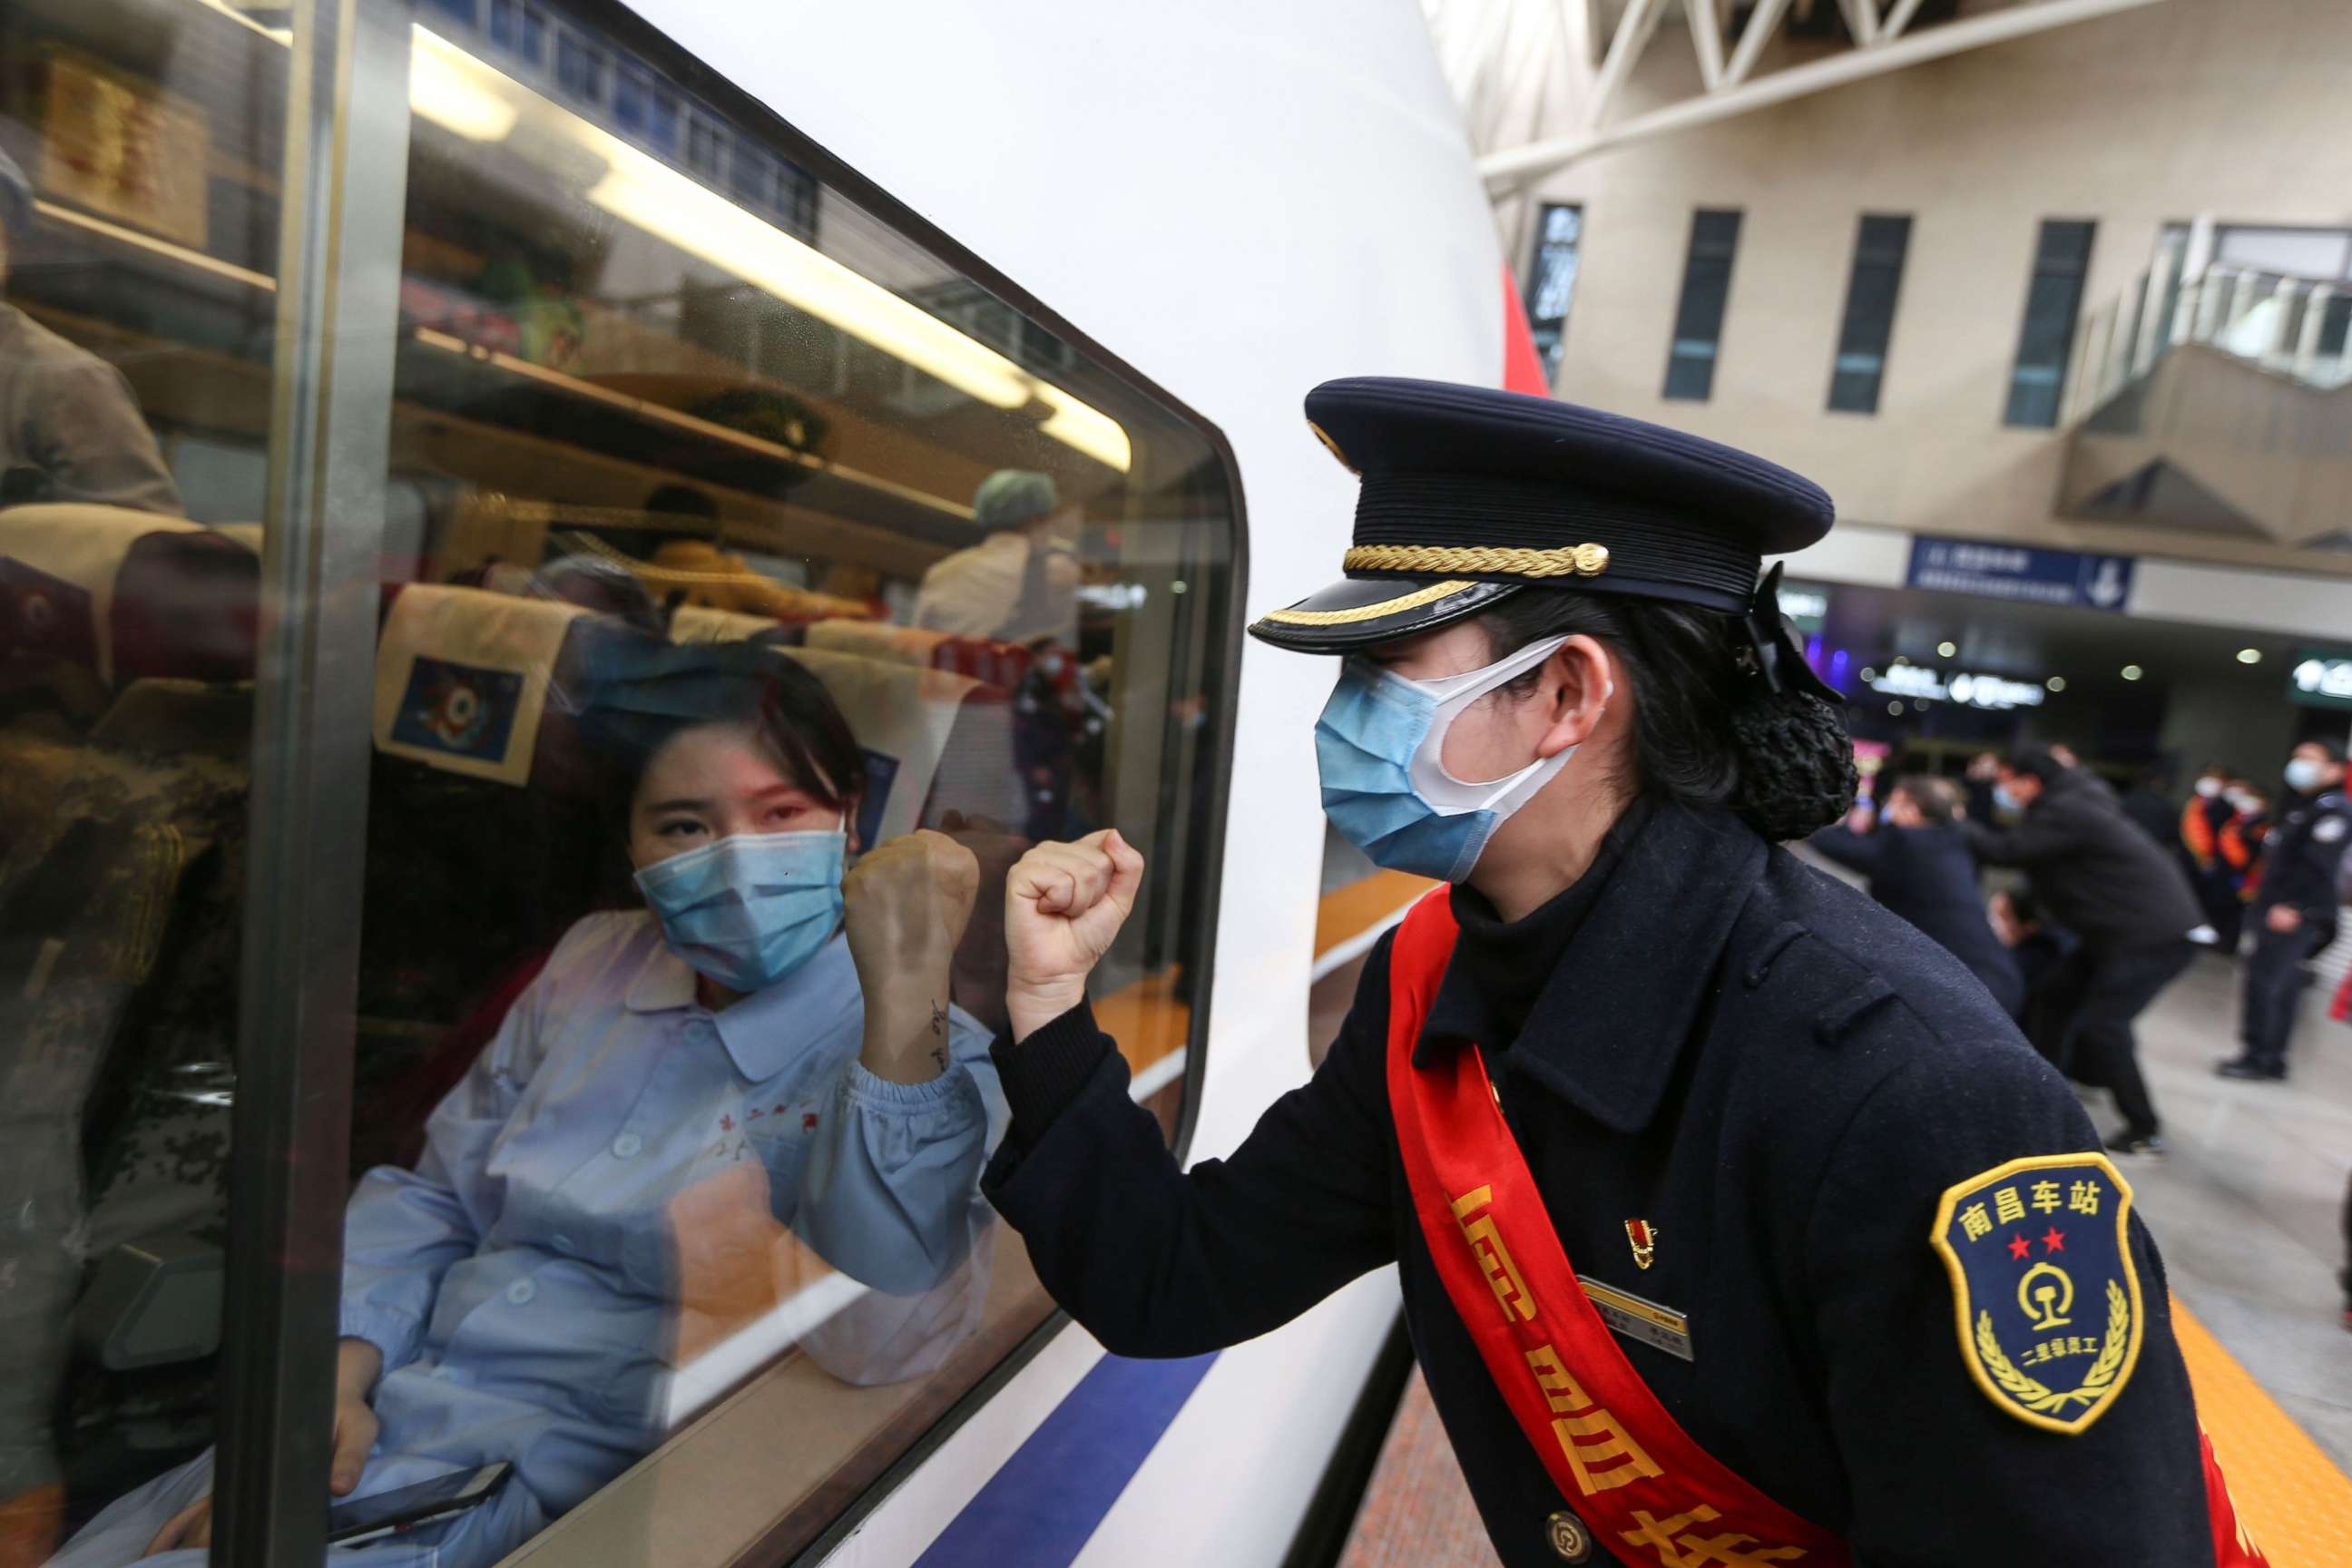 PHOTO: This photo taken on Feb. 13, 2020 in Nanchang, China, shows a train attendant gesturing to medical staff leaving for Wuhan, the epicenter of a novel coronavirus outbreak.